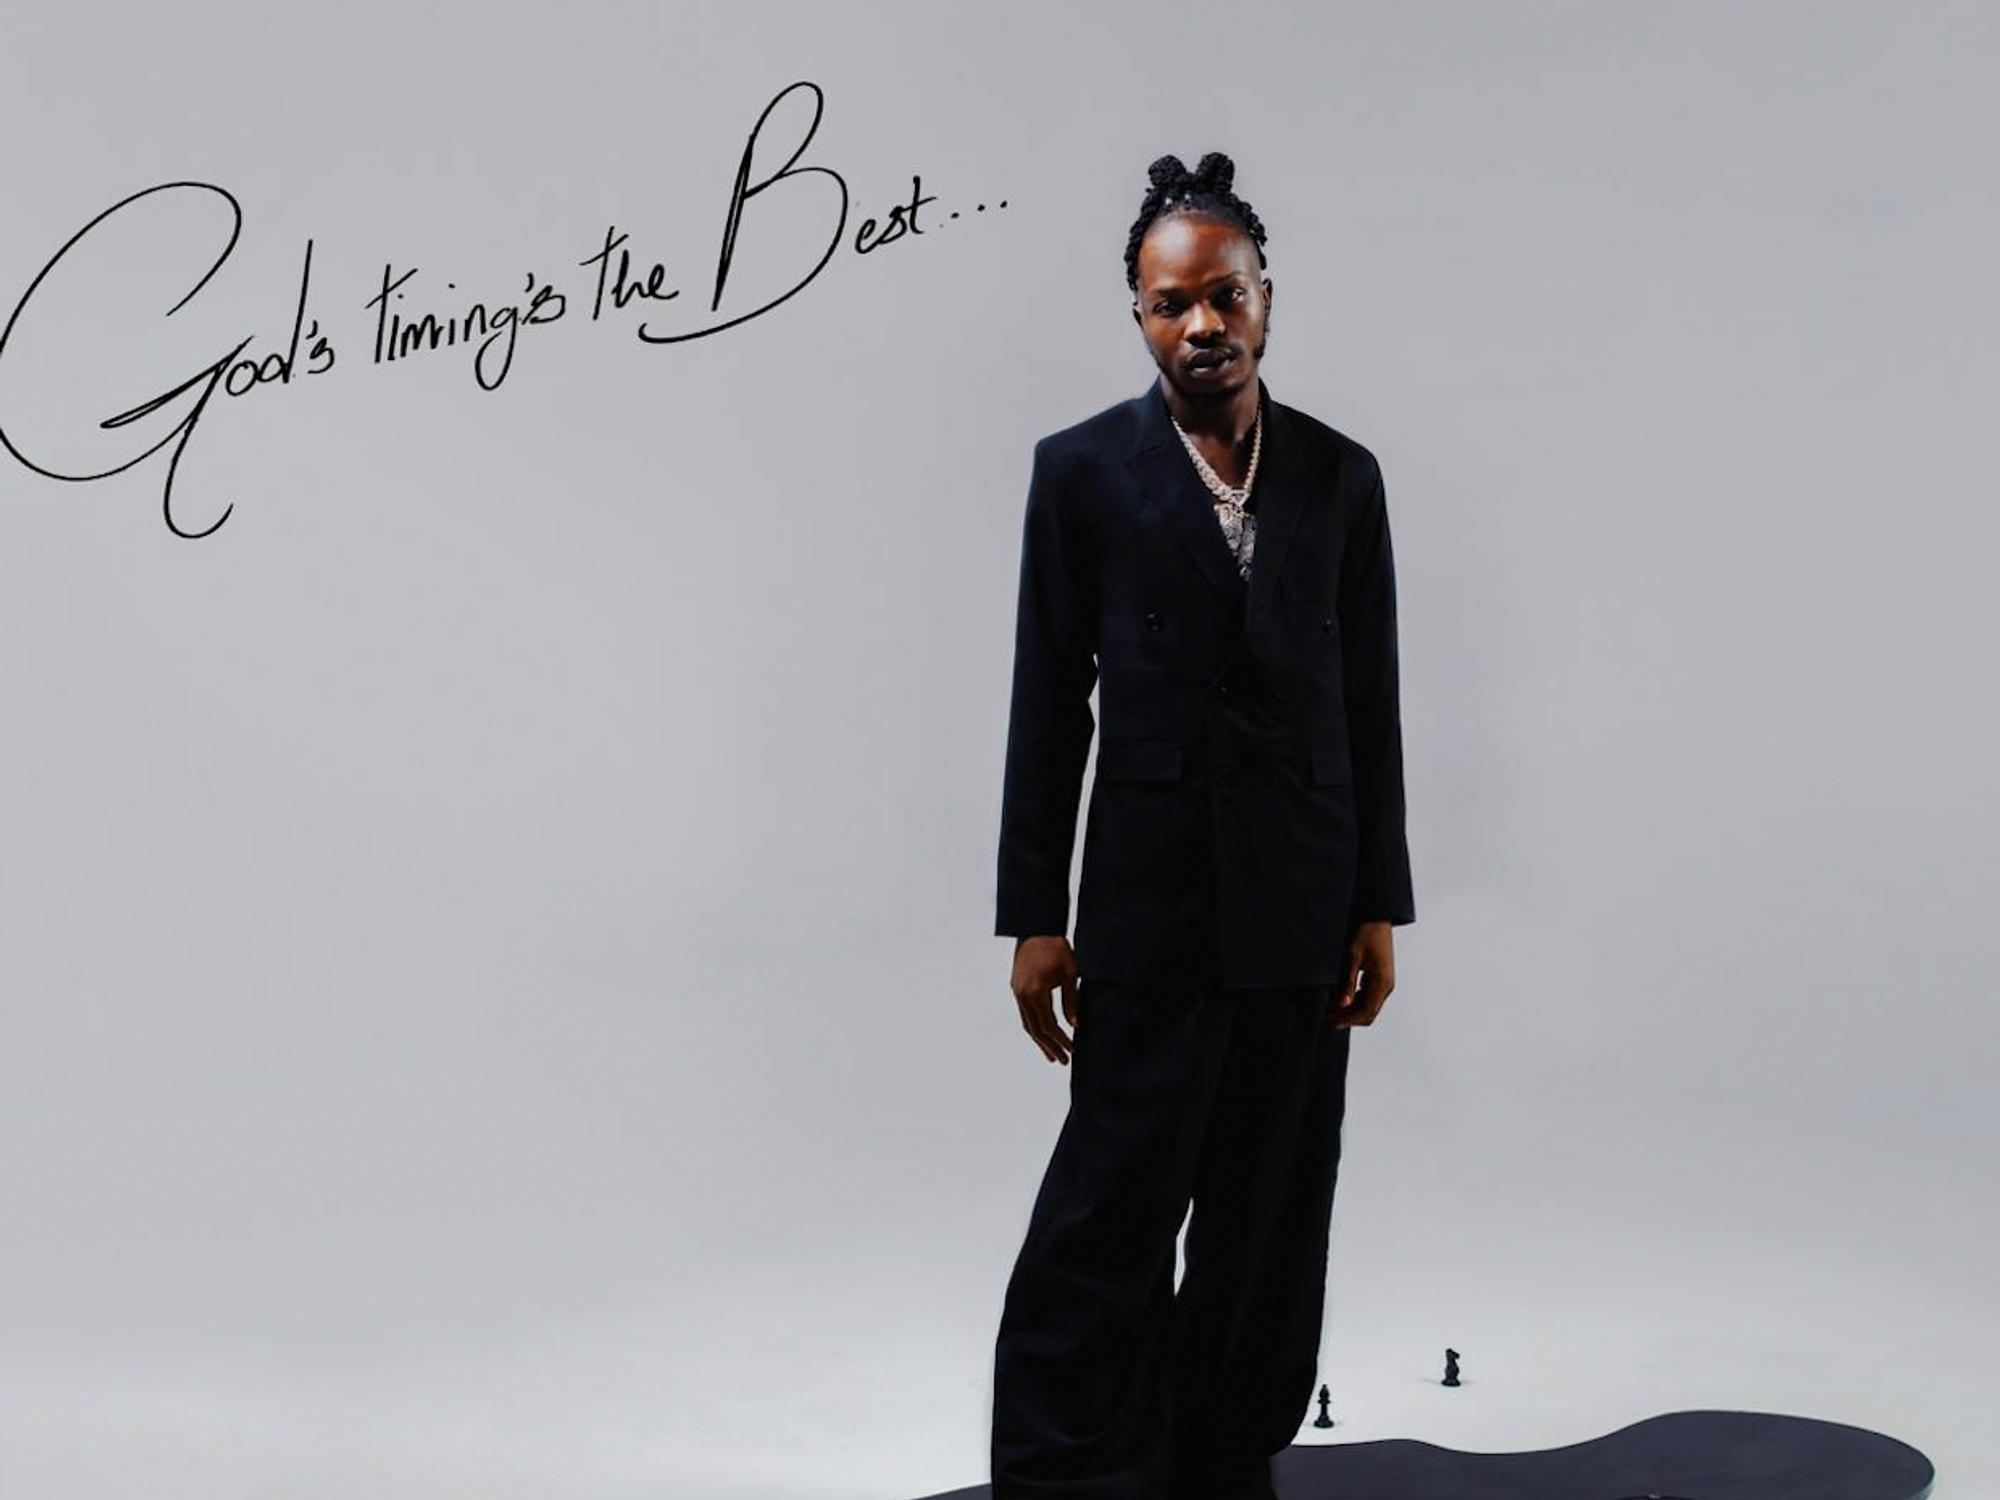 <div>Naira Marley Marks His Debut Album By Reminding Us That 'God's Timing's The Best'</div>